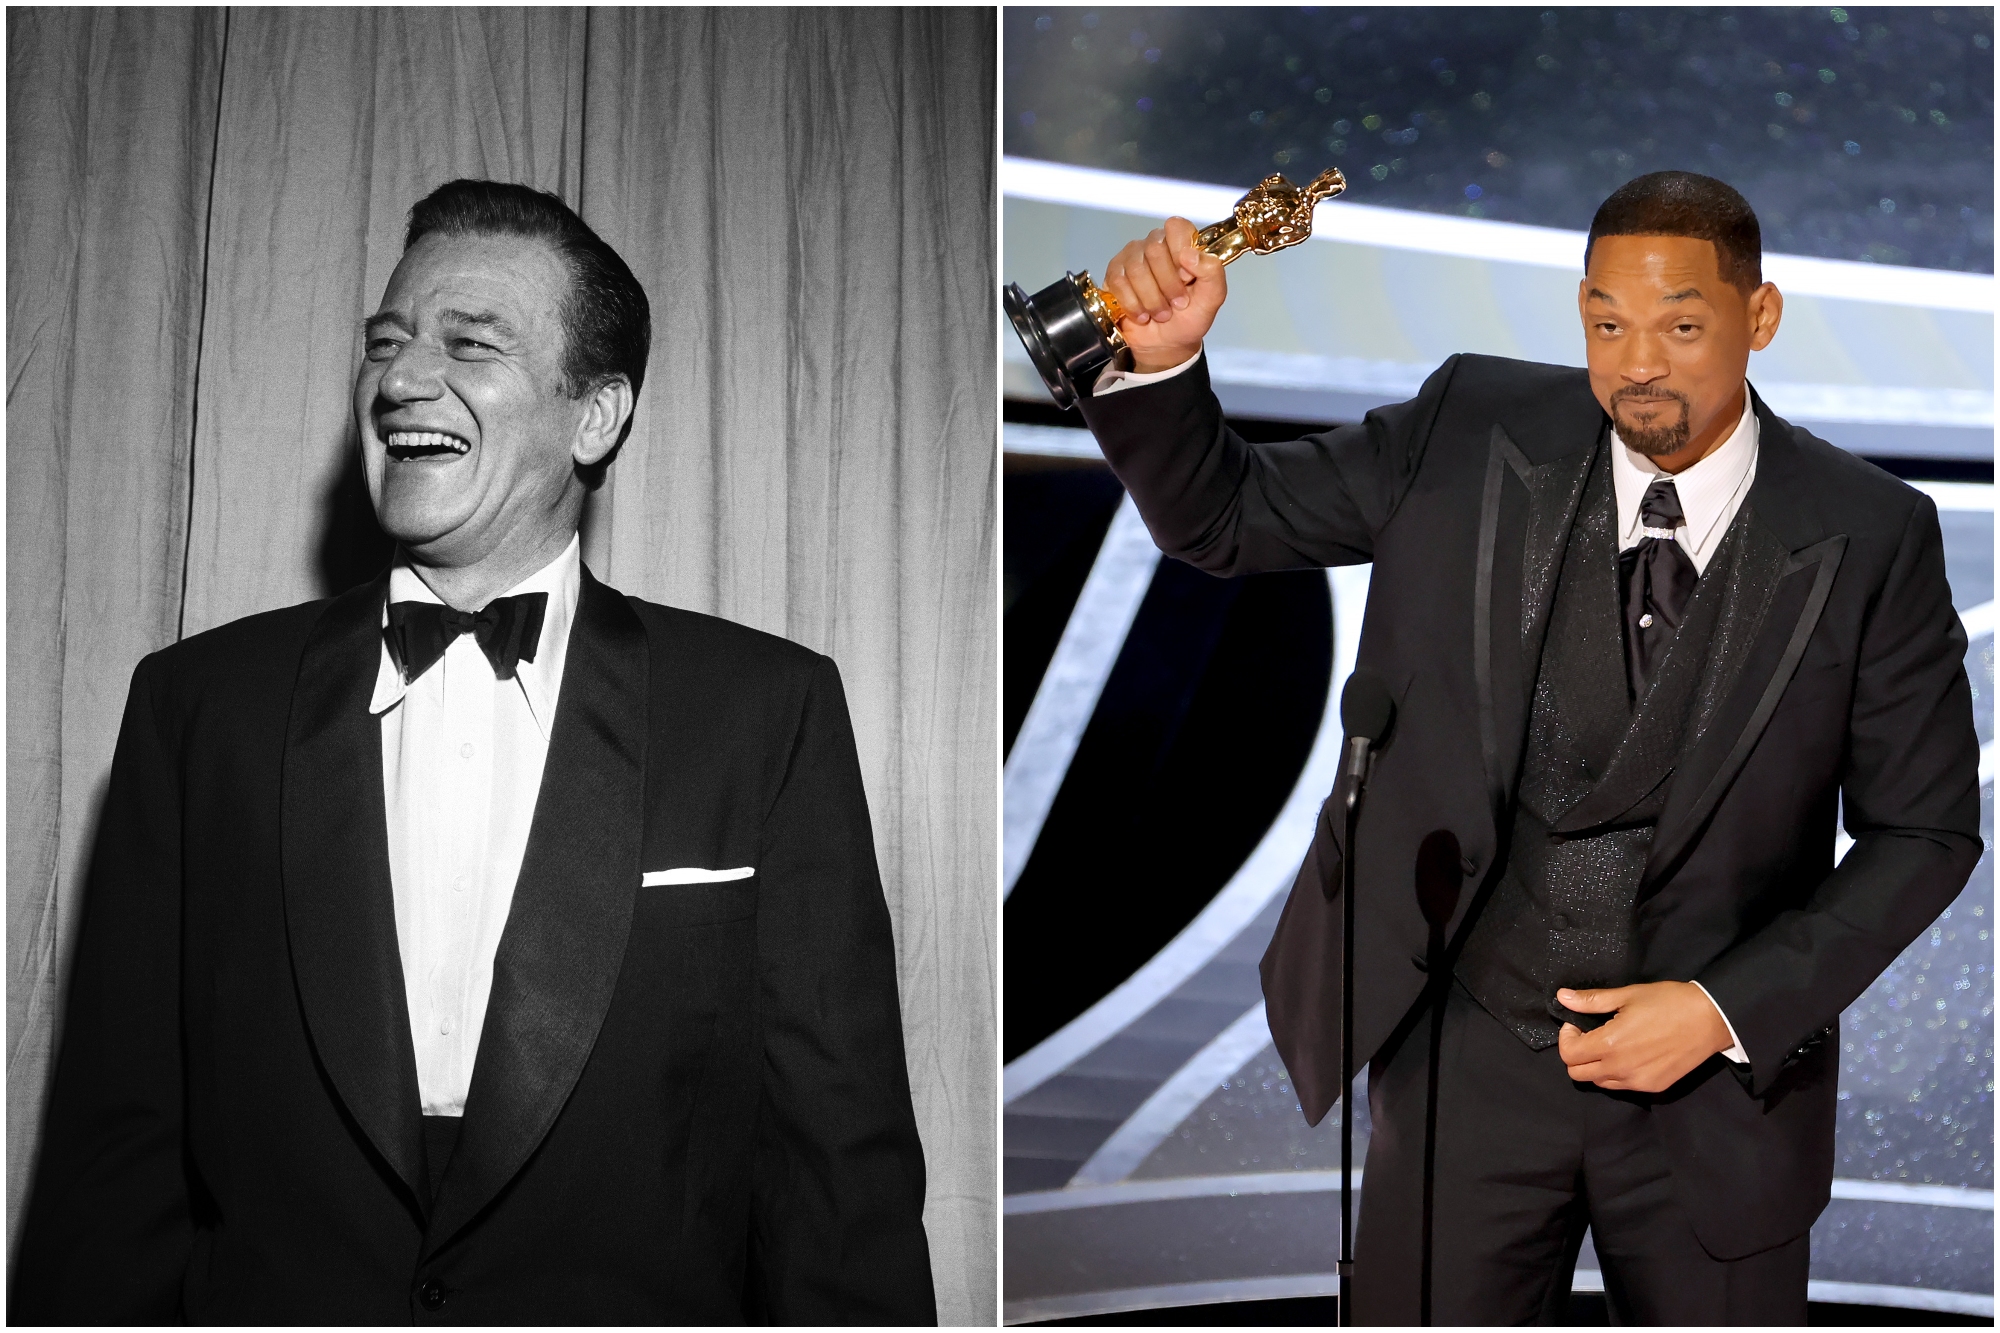 John Wayne and Will Smith at the Oscars. Wayne is smiling in a black-and-white photo wearing a tux. Smith is wearing a suit, holding up his Oscars statue.